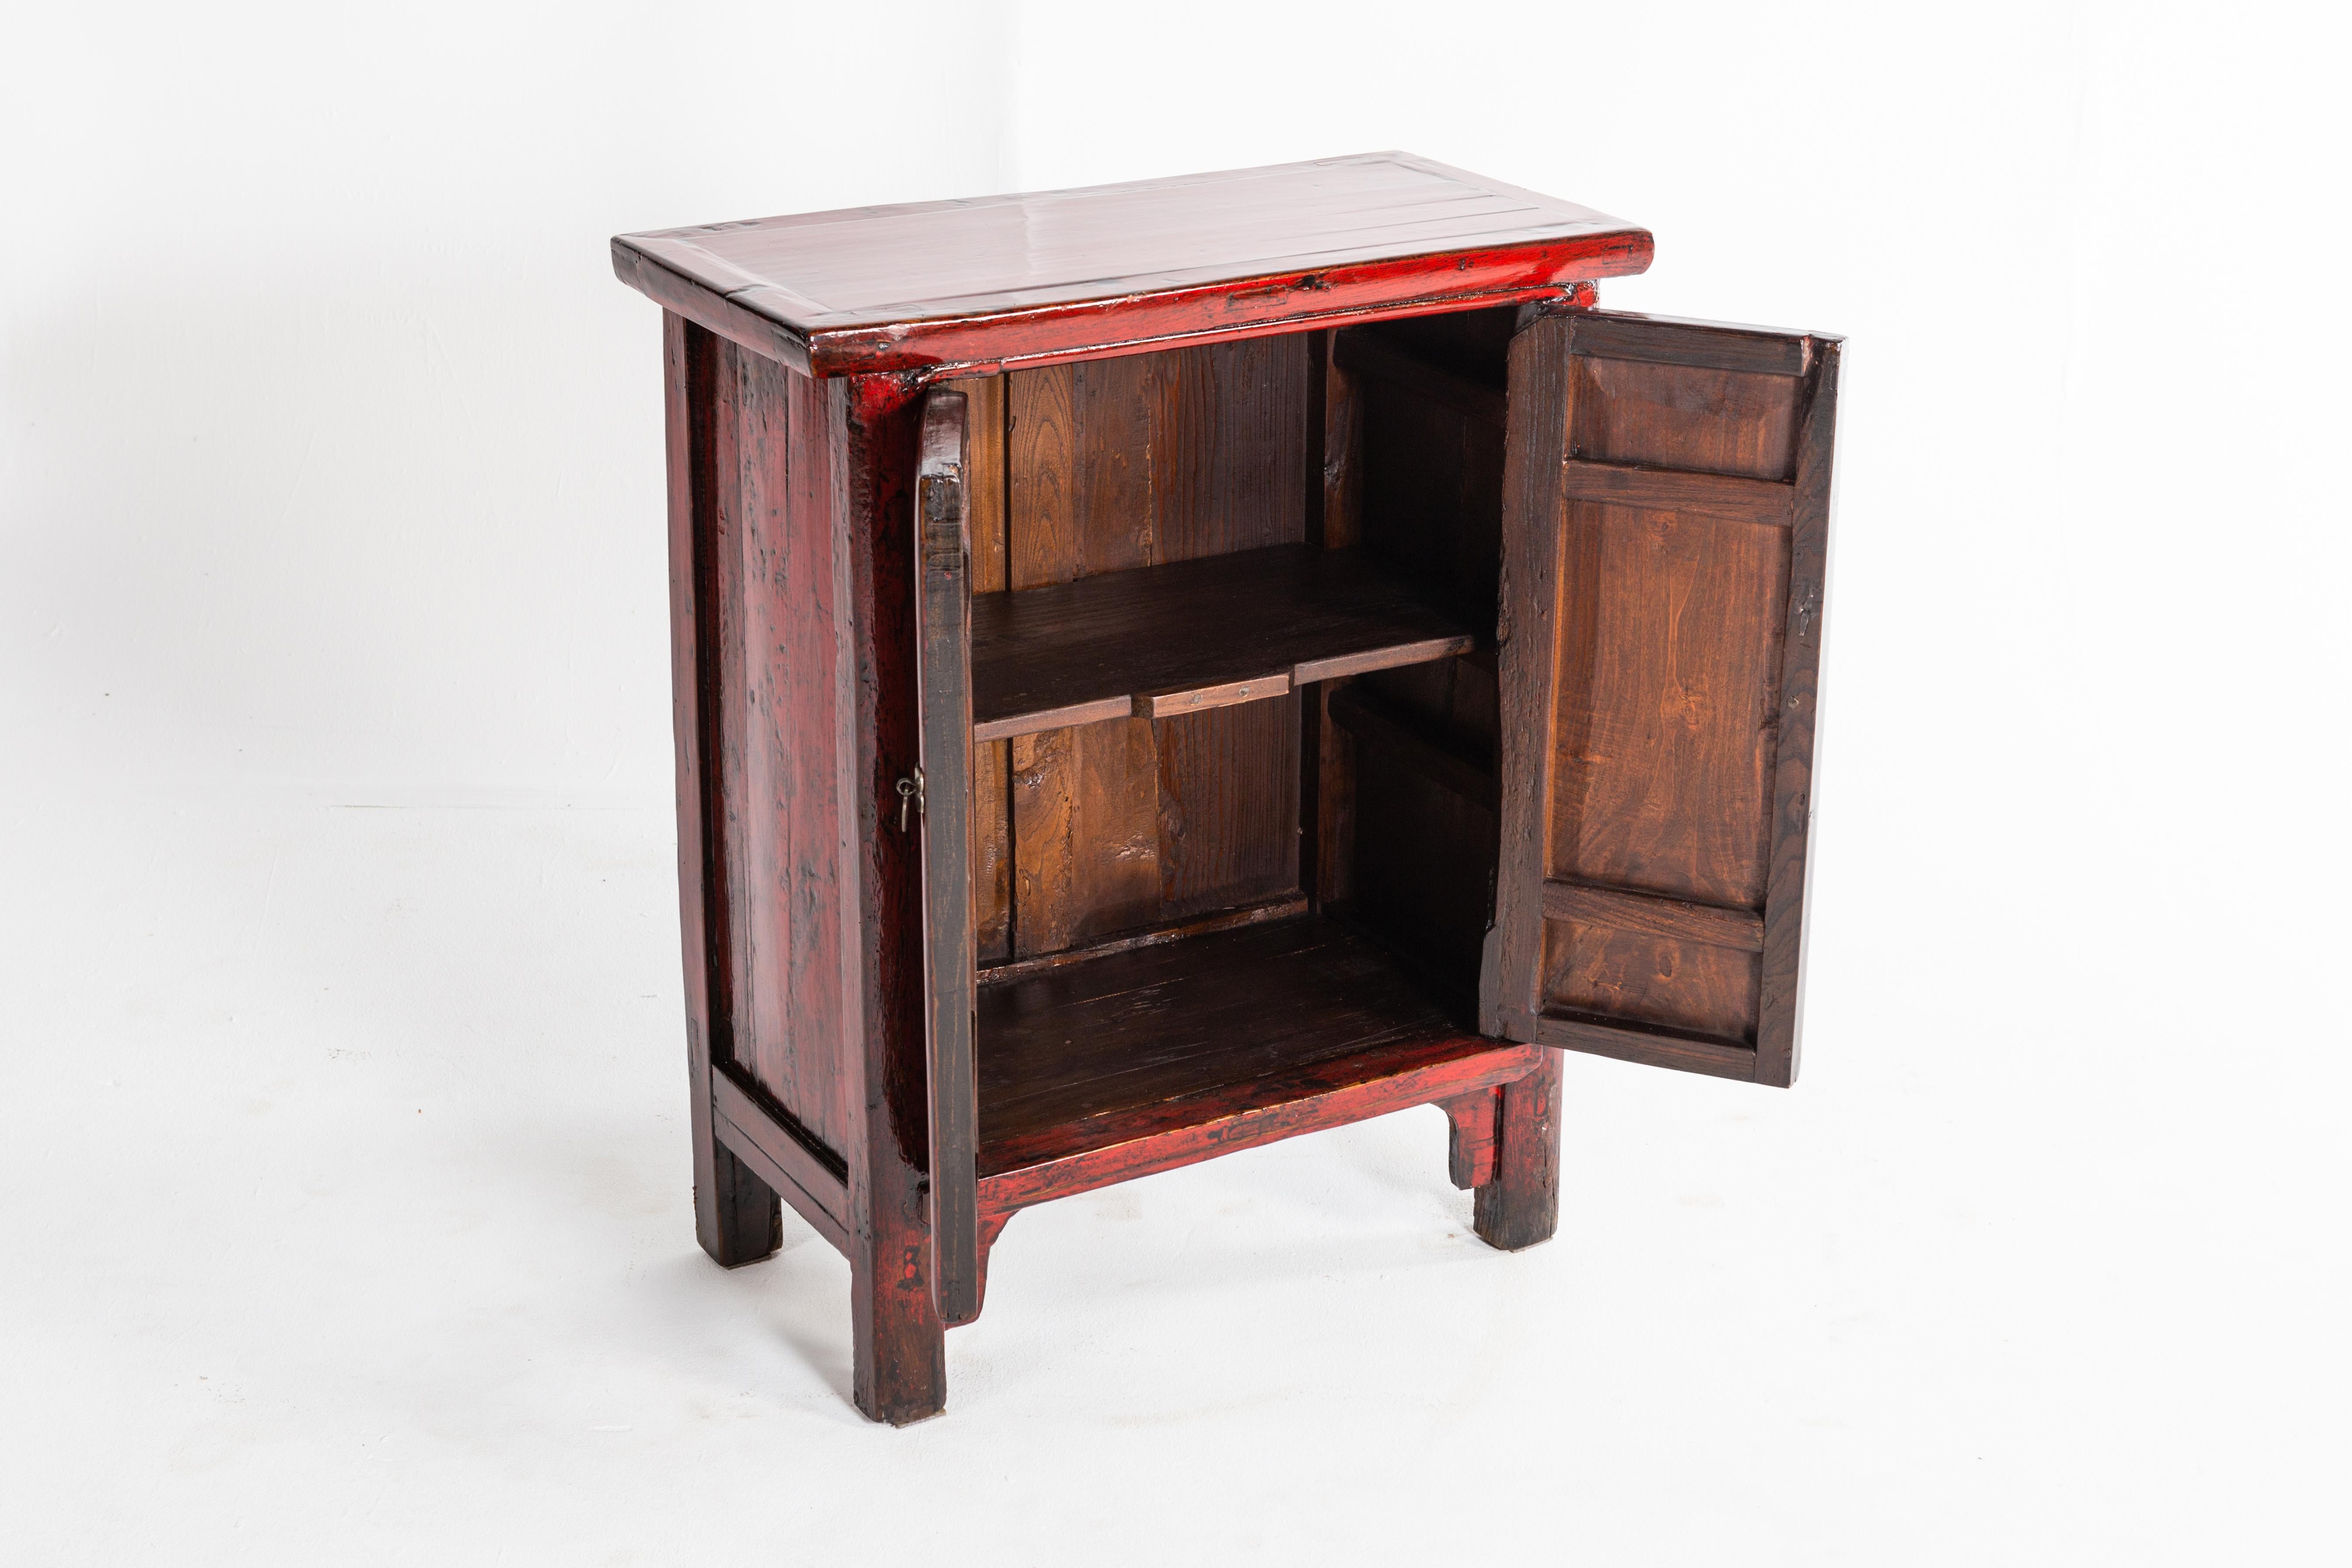 20th Century Red Lacquer Chinese Cabinet with a Pair of Doors